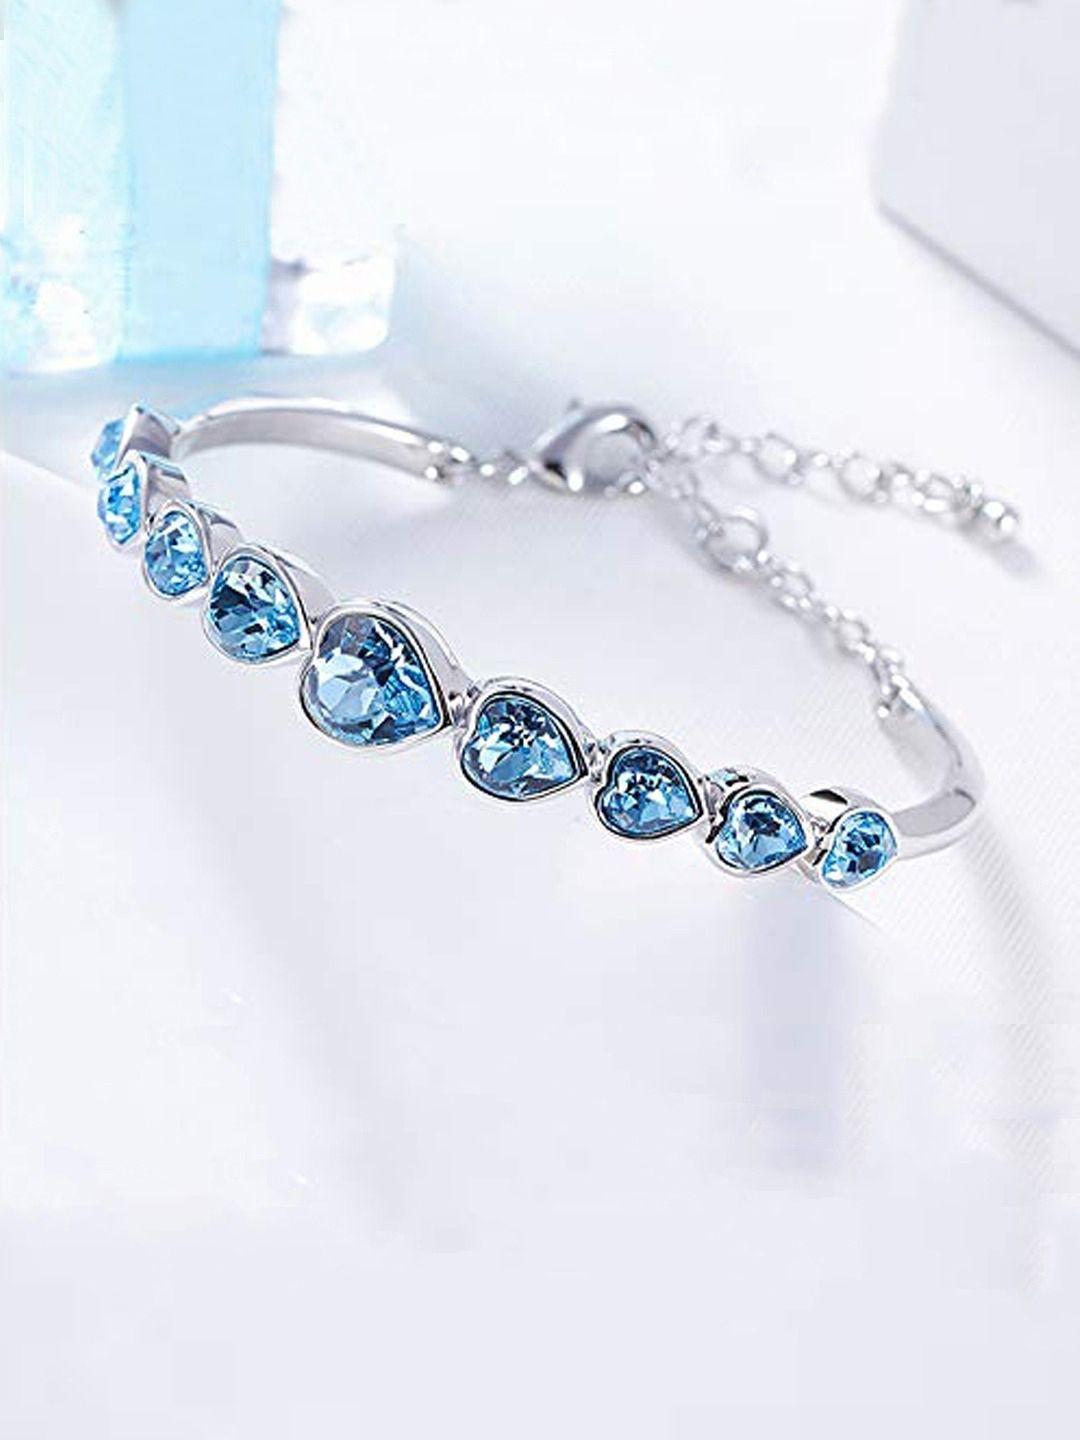 yellow chimes crystals from swarovski collection blue & silver-toned metal rhodium-plated charm bracelet